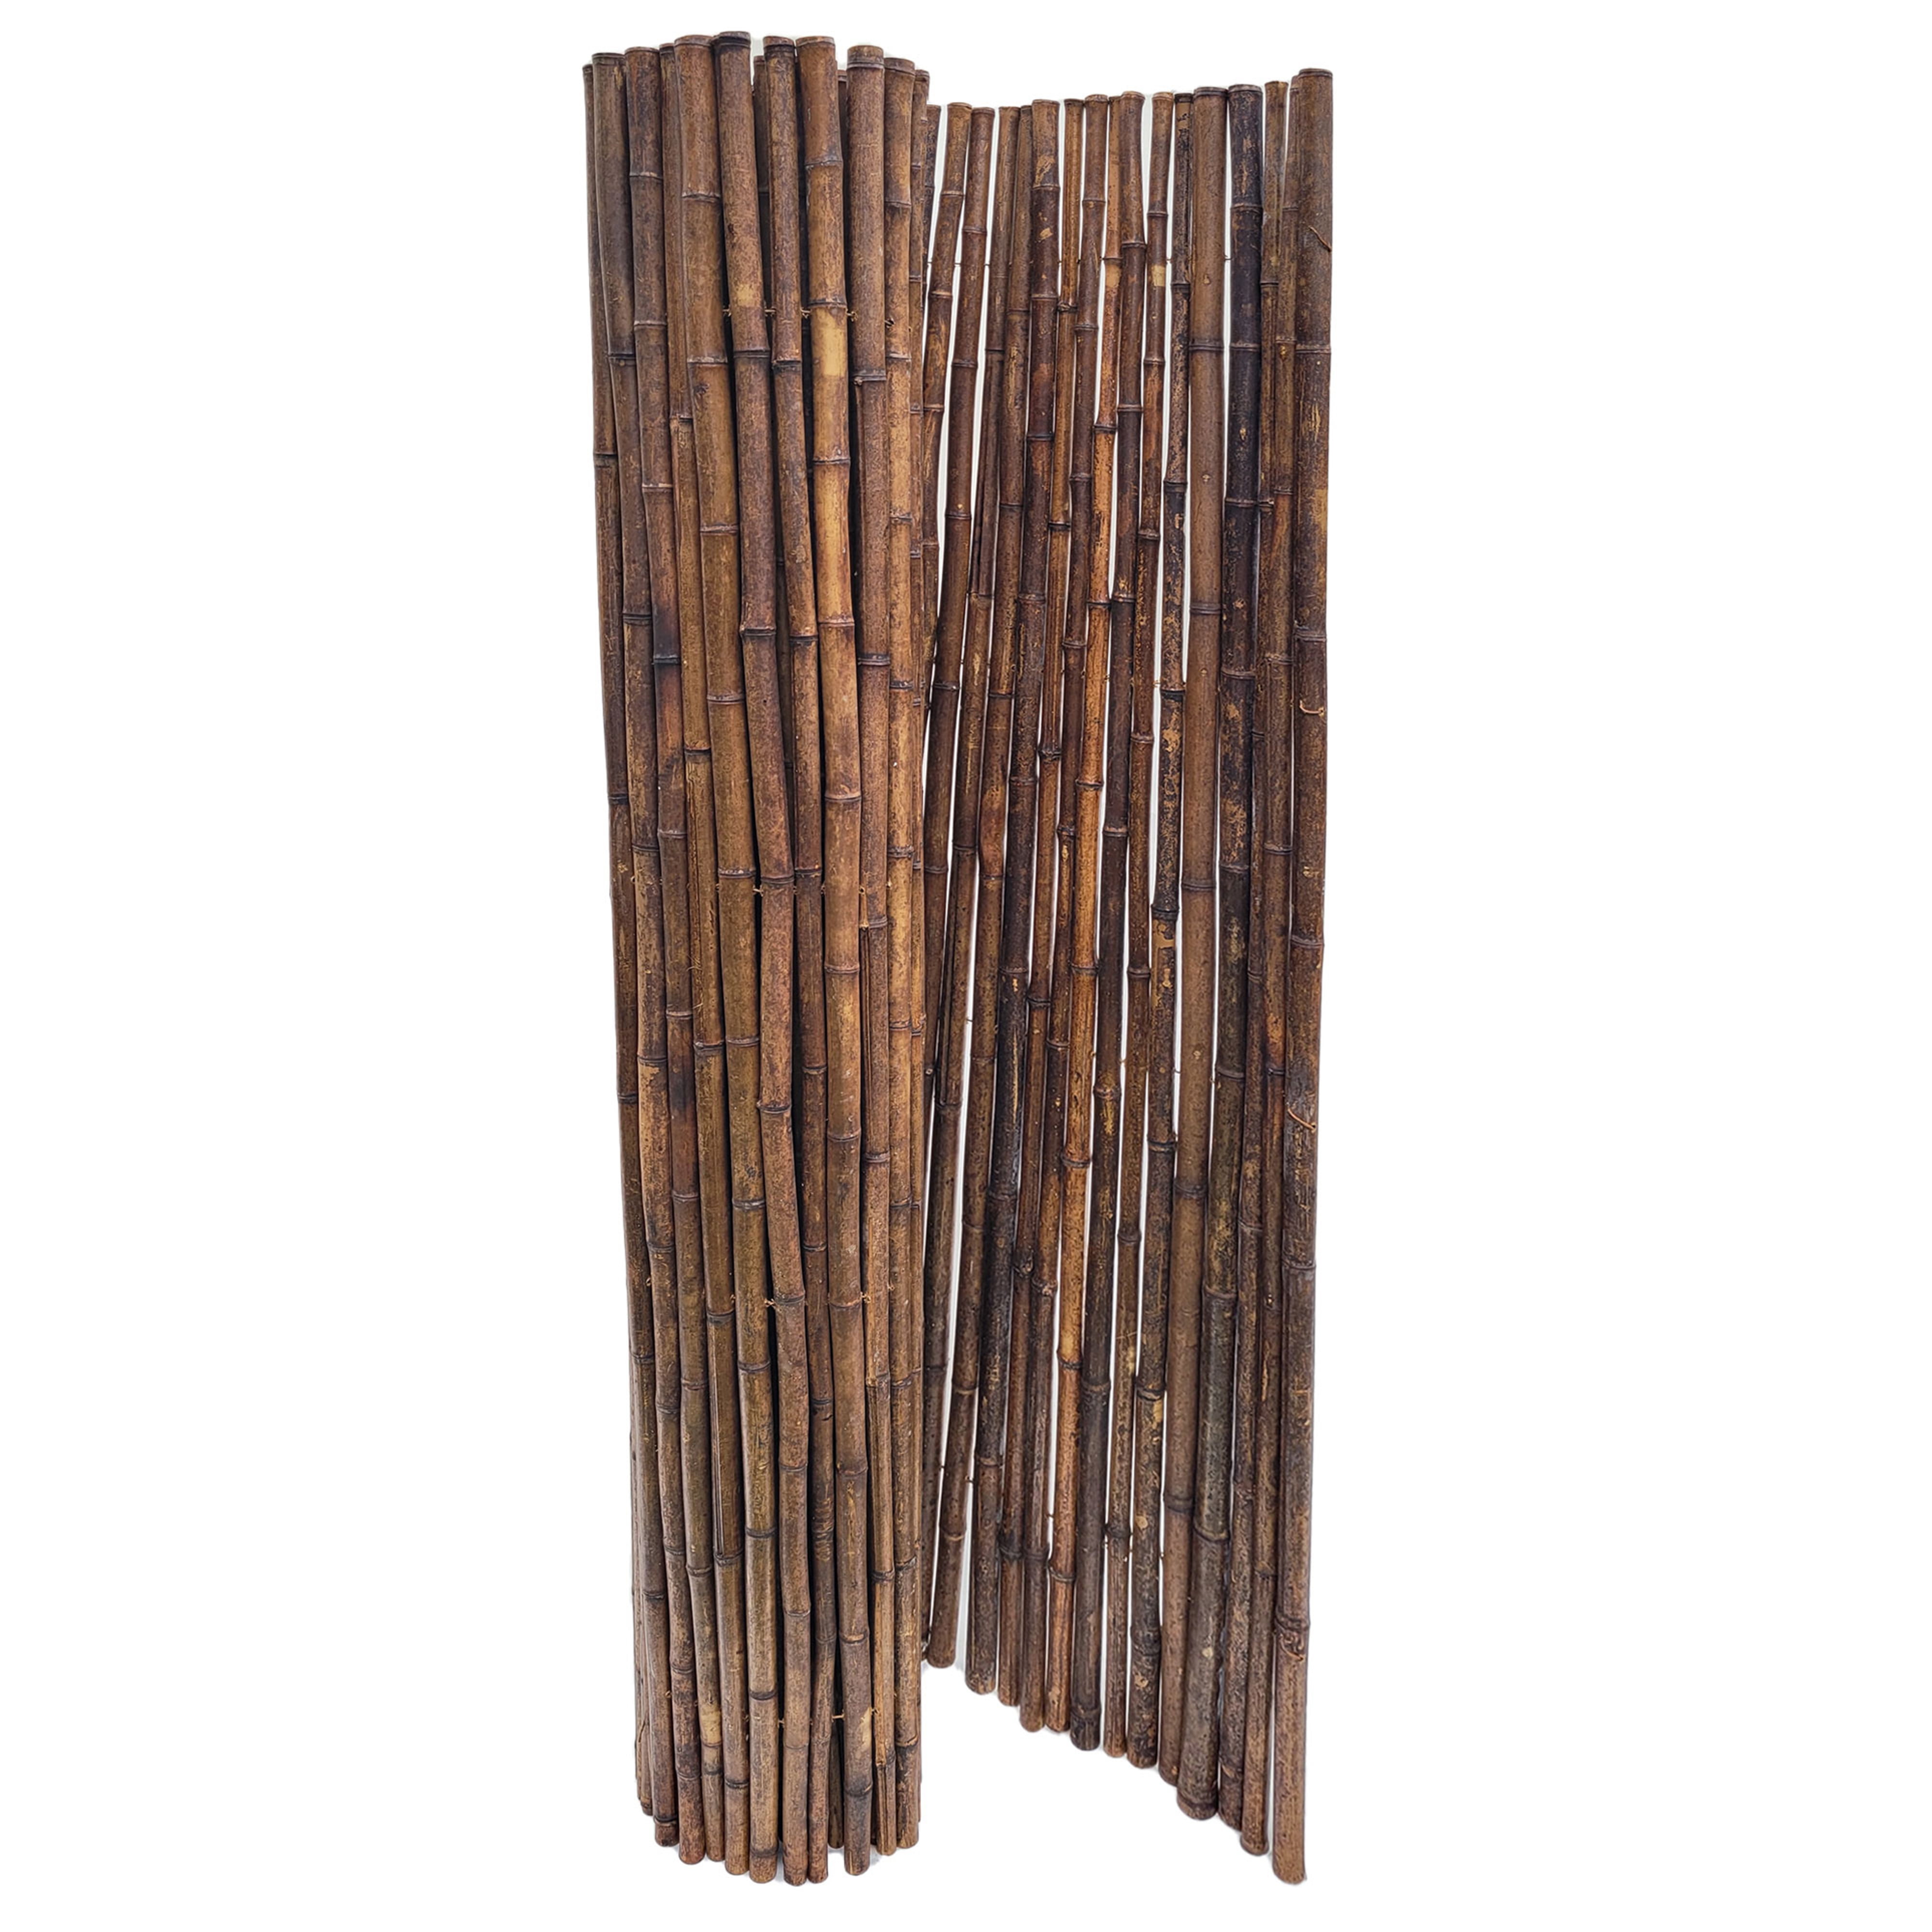 Backyard X-Scapes Bamboo Fence Panel Caramel Brown 1/